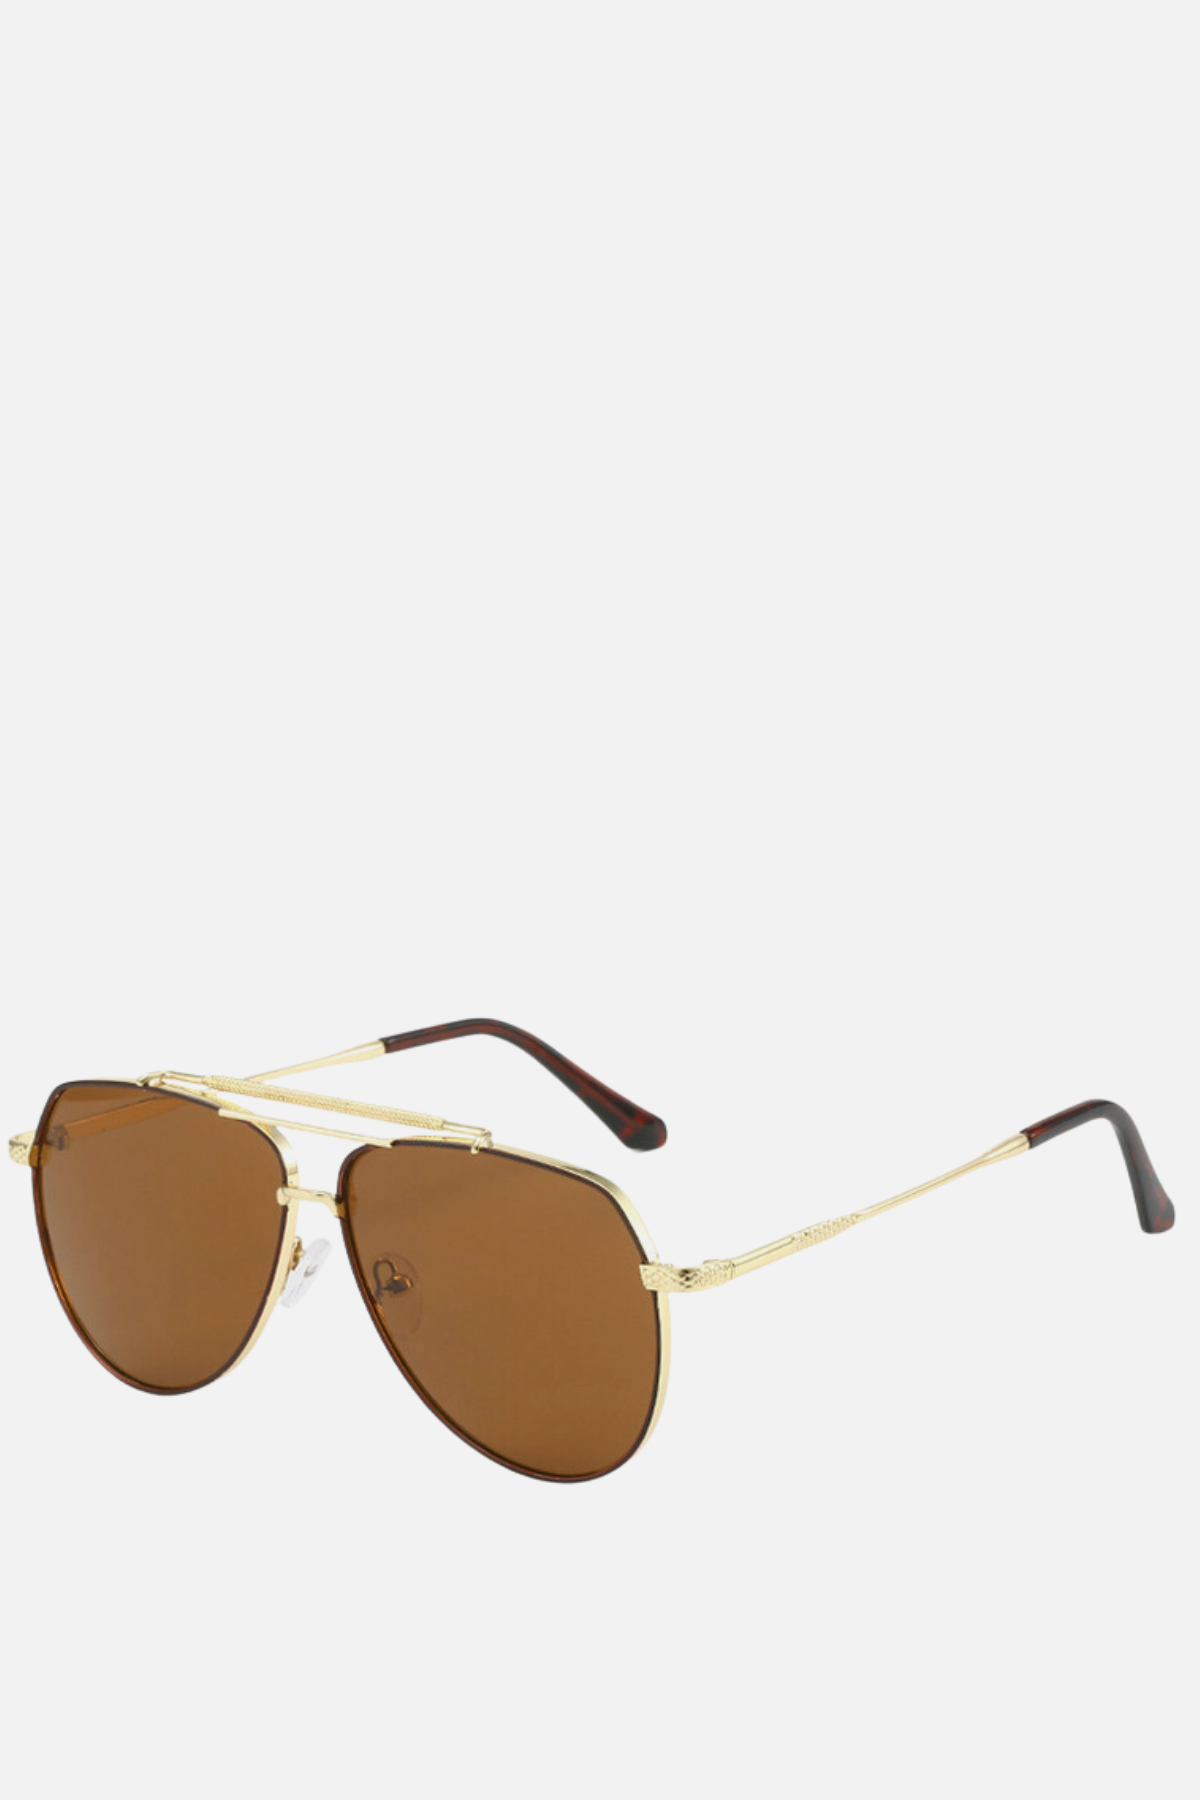 MOSCOW Brown and Gold Oversized Aviators